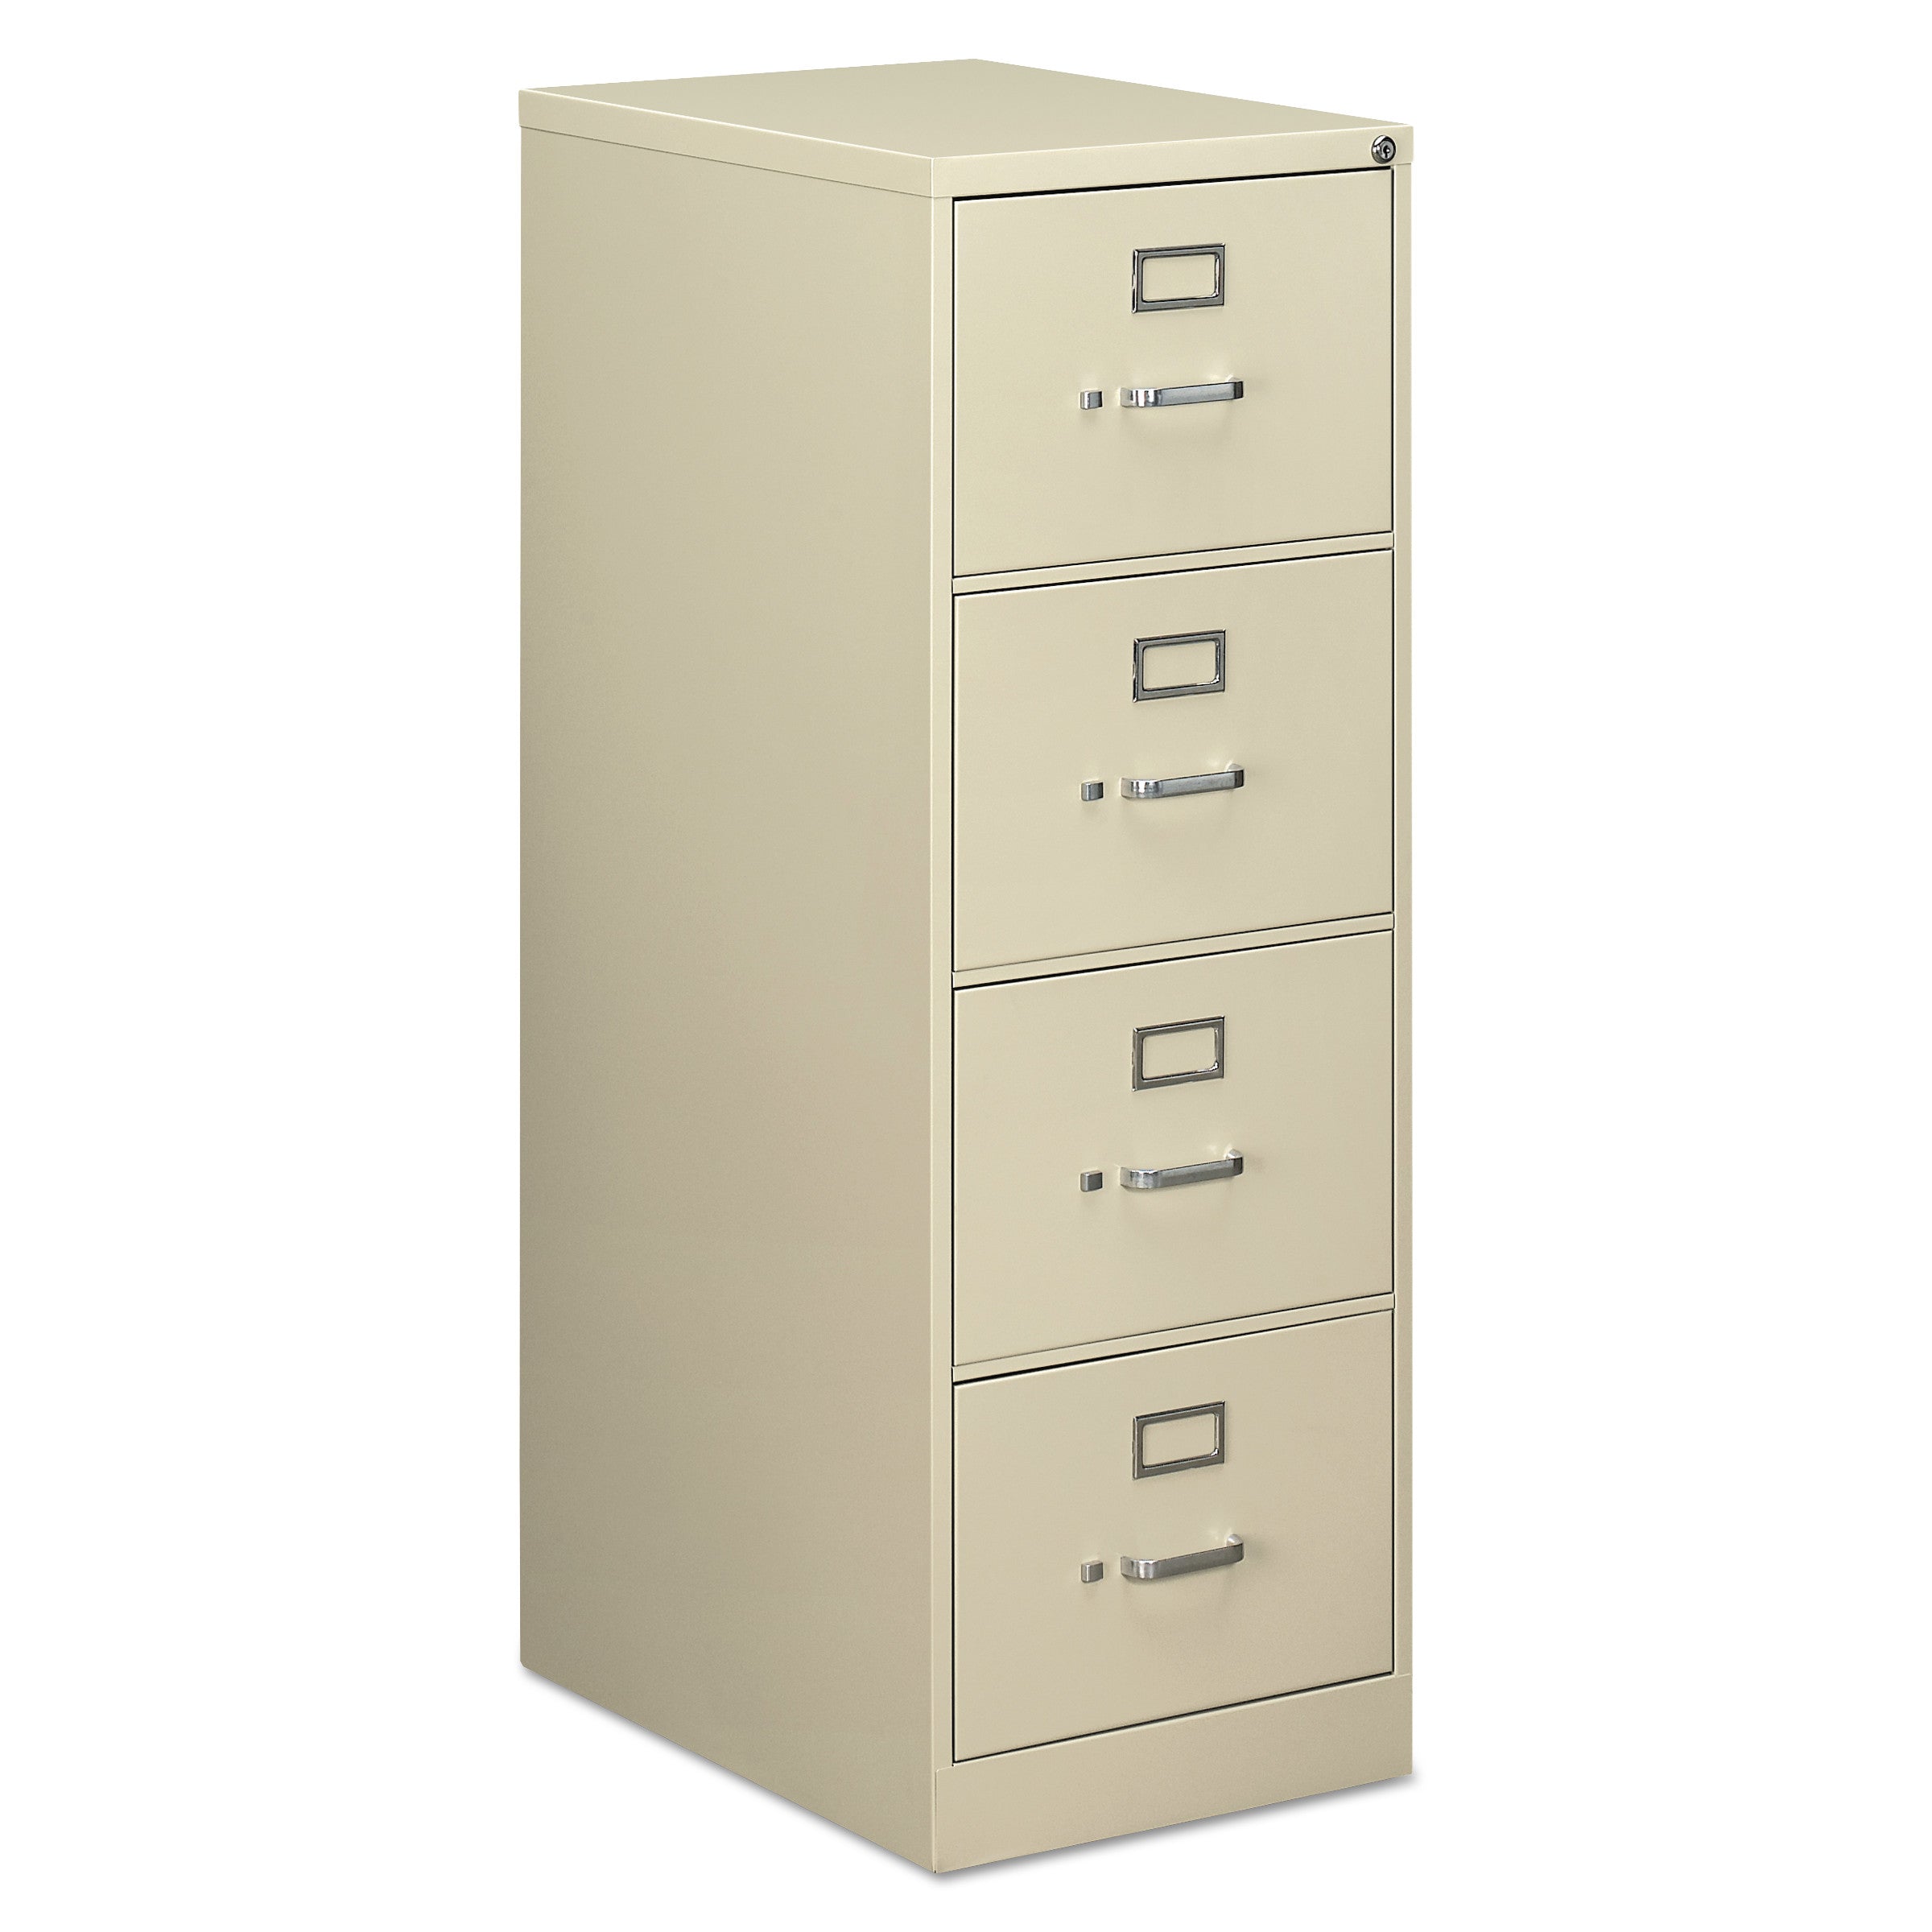 economy-vertical-file-4-legal-size-file-drawers-putty-18-x-25-x-52_alehvf1952py - 1